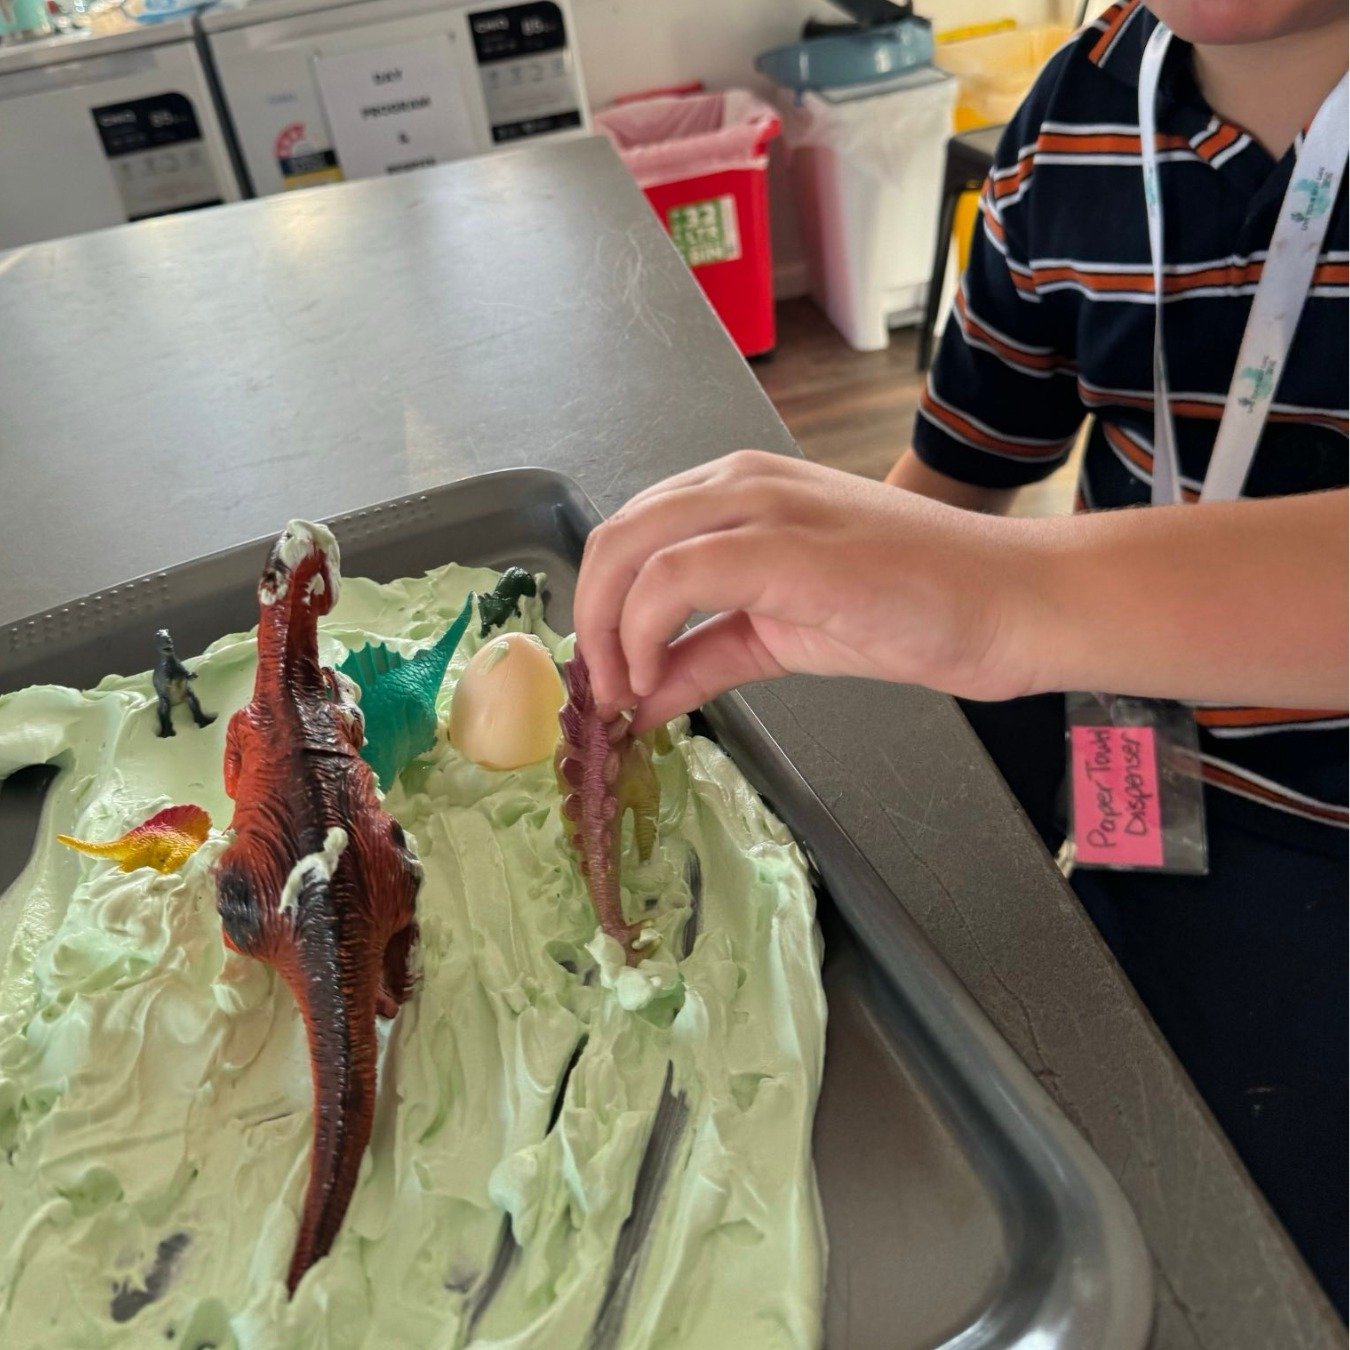 Sensory Play for Dino Week 🦖 

This week our After-School Activity Program participants had fun creating a Dino landscape with whipped cream!!

From whipping the cream, to playing with the Dinos, our participants were definitely hands-on. 

Sensory 